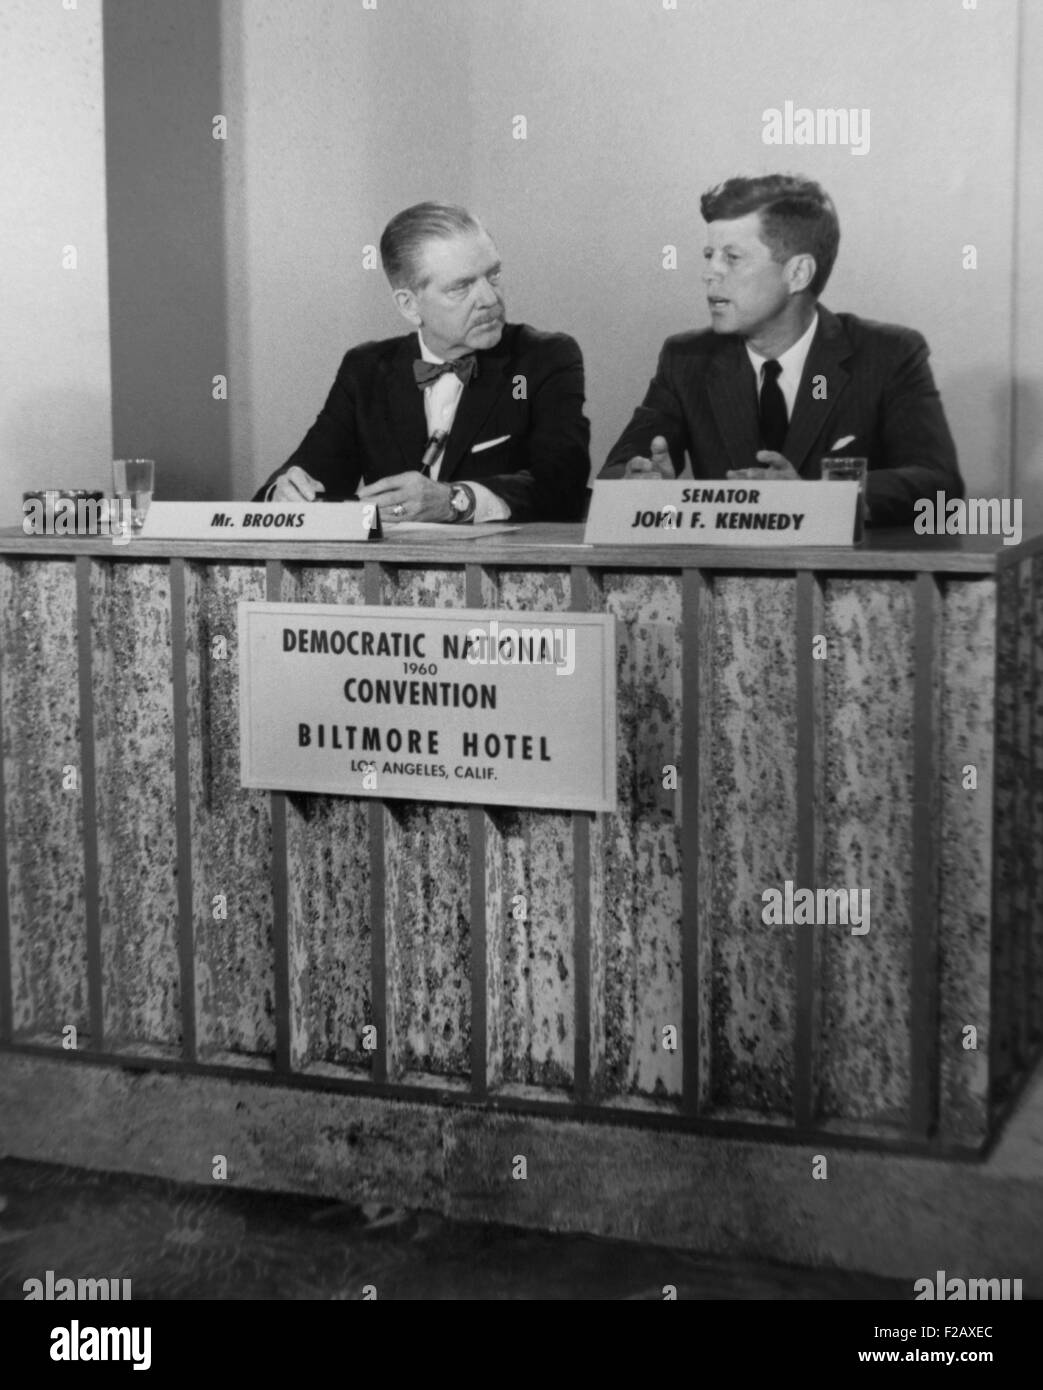 Senator John F. Kennedy on television show MEET THE PRESS. He was interviewed by Ned Brooks during the Democratic National Convention in Los Angeles, July 11-17, 1960. (BSLOC 2015 2 220) Stock Photo